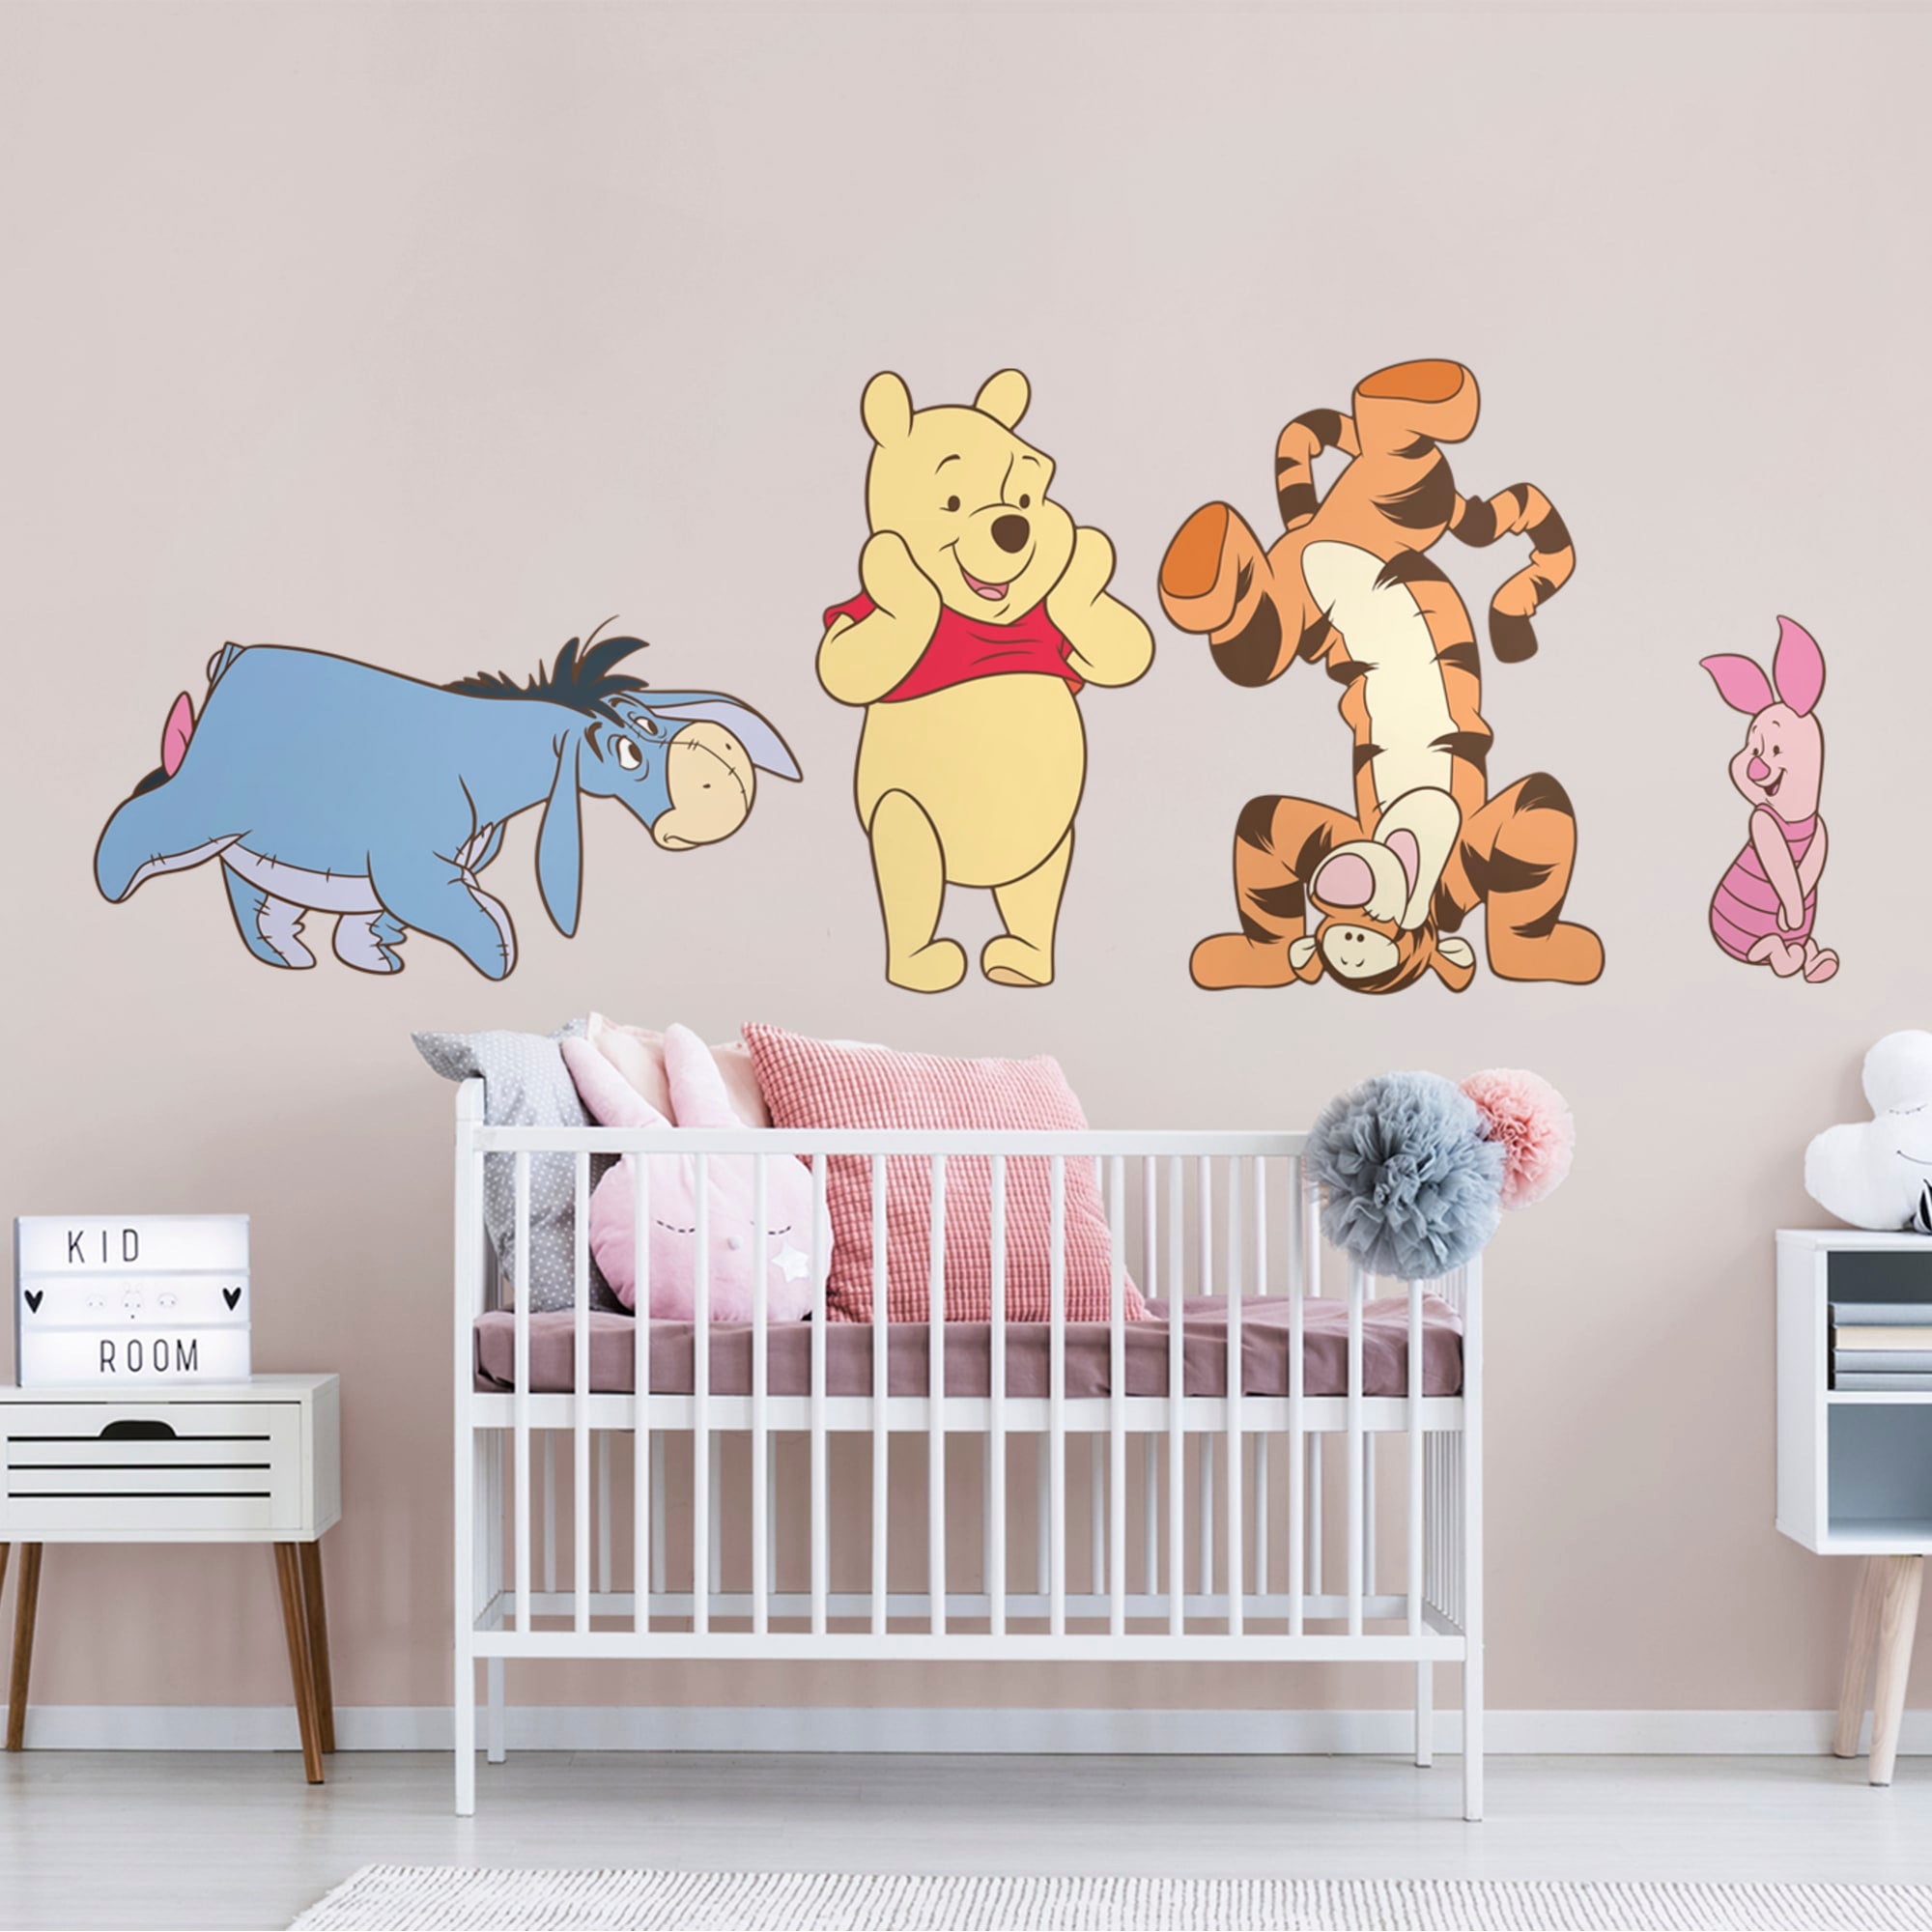 Winnie the Pooh: Collection - Officially Licensed Disney Removable Wall Decals 79.0"W x 49.5"H by Fathead | Wood/Vinyl